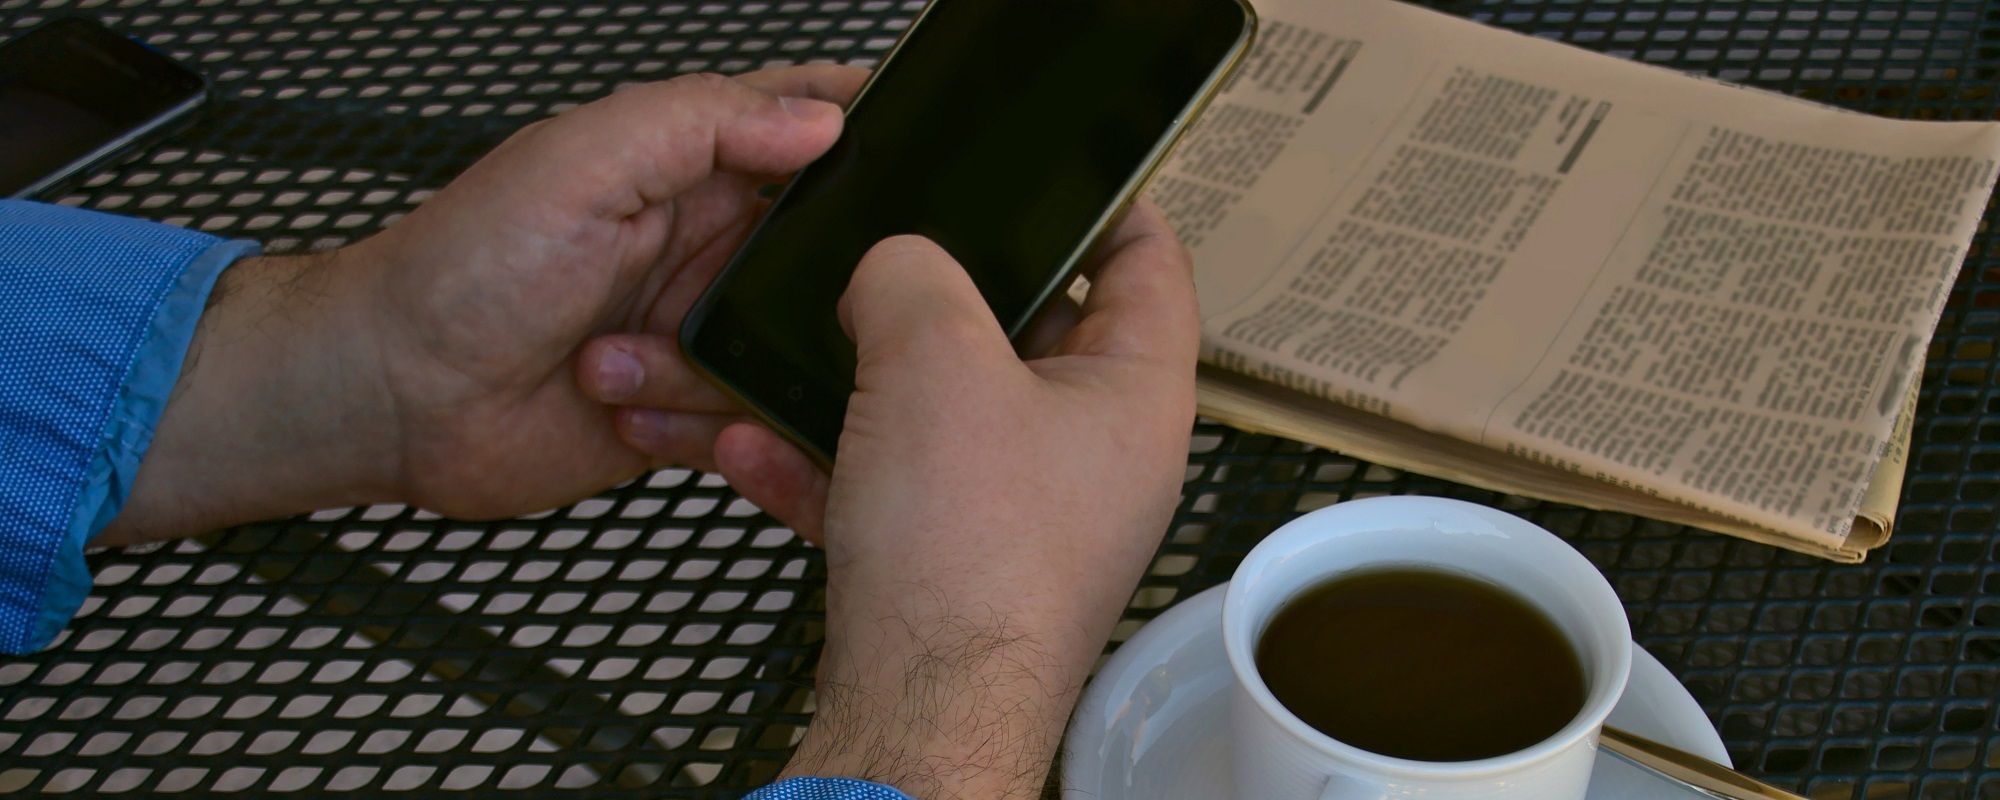 Man Reading News On His Phone And Newspaper